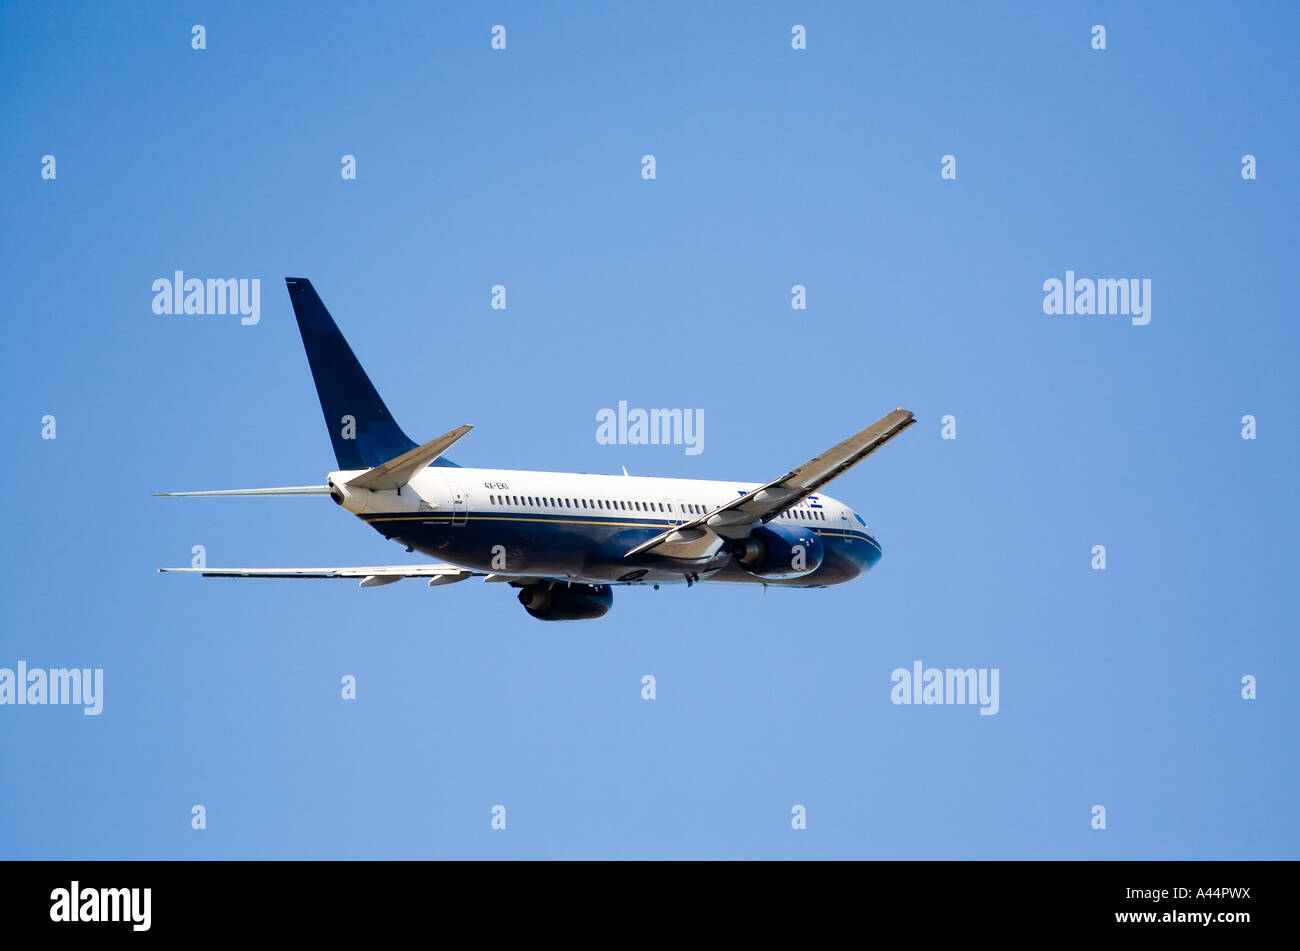 Boeing 737-200 taking off Stock Photo